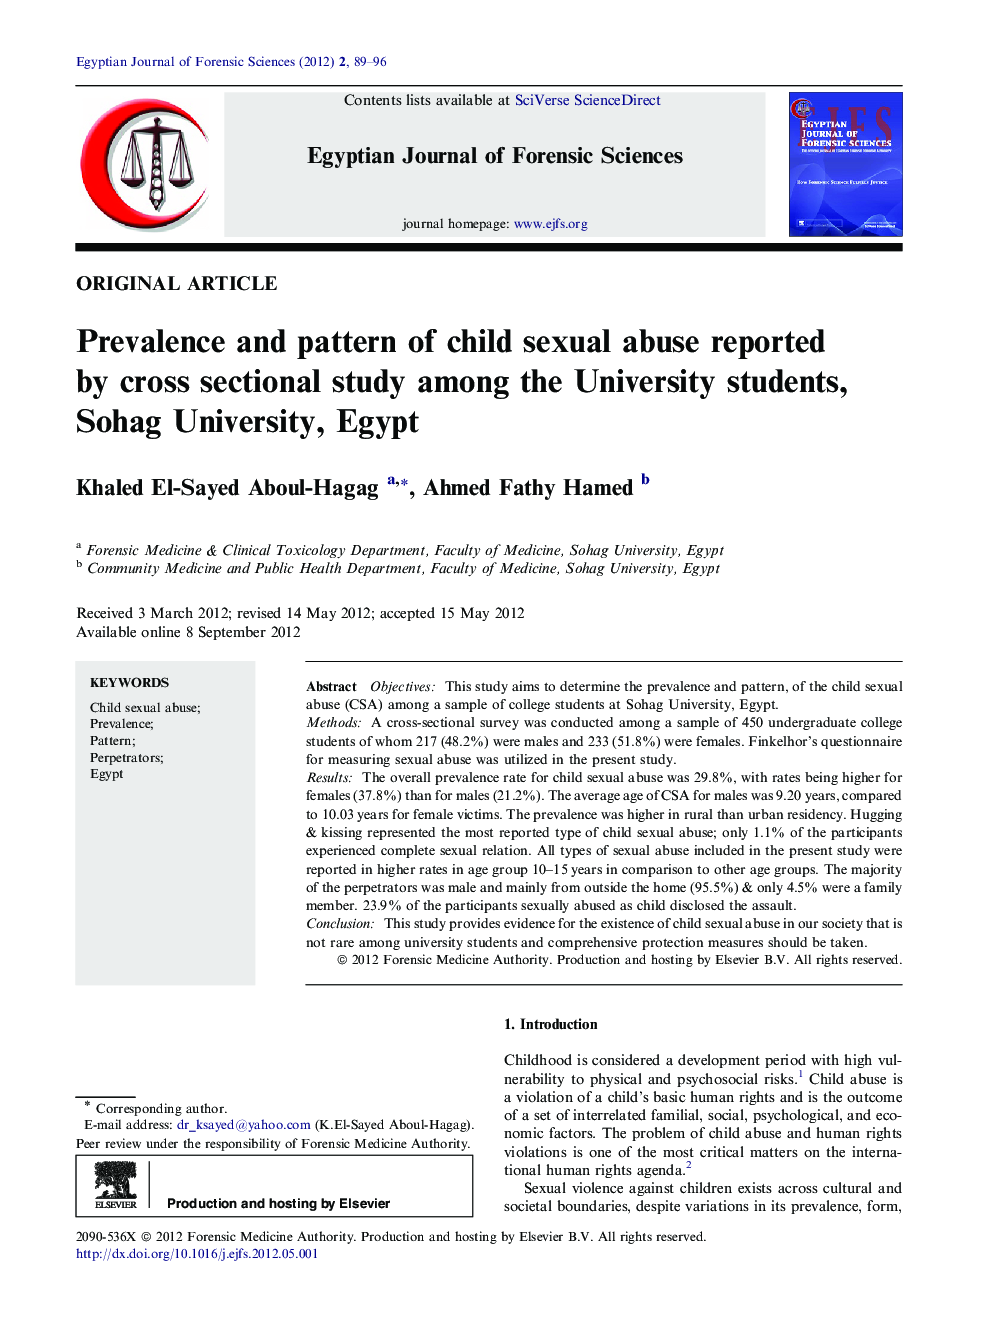 Prevalence and pattern of child sexual abuse reported by cross sectional study among the University students, Sohag University, Egypt 